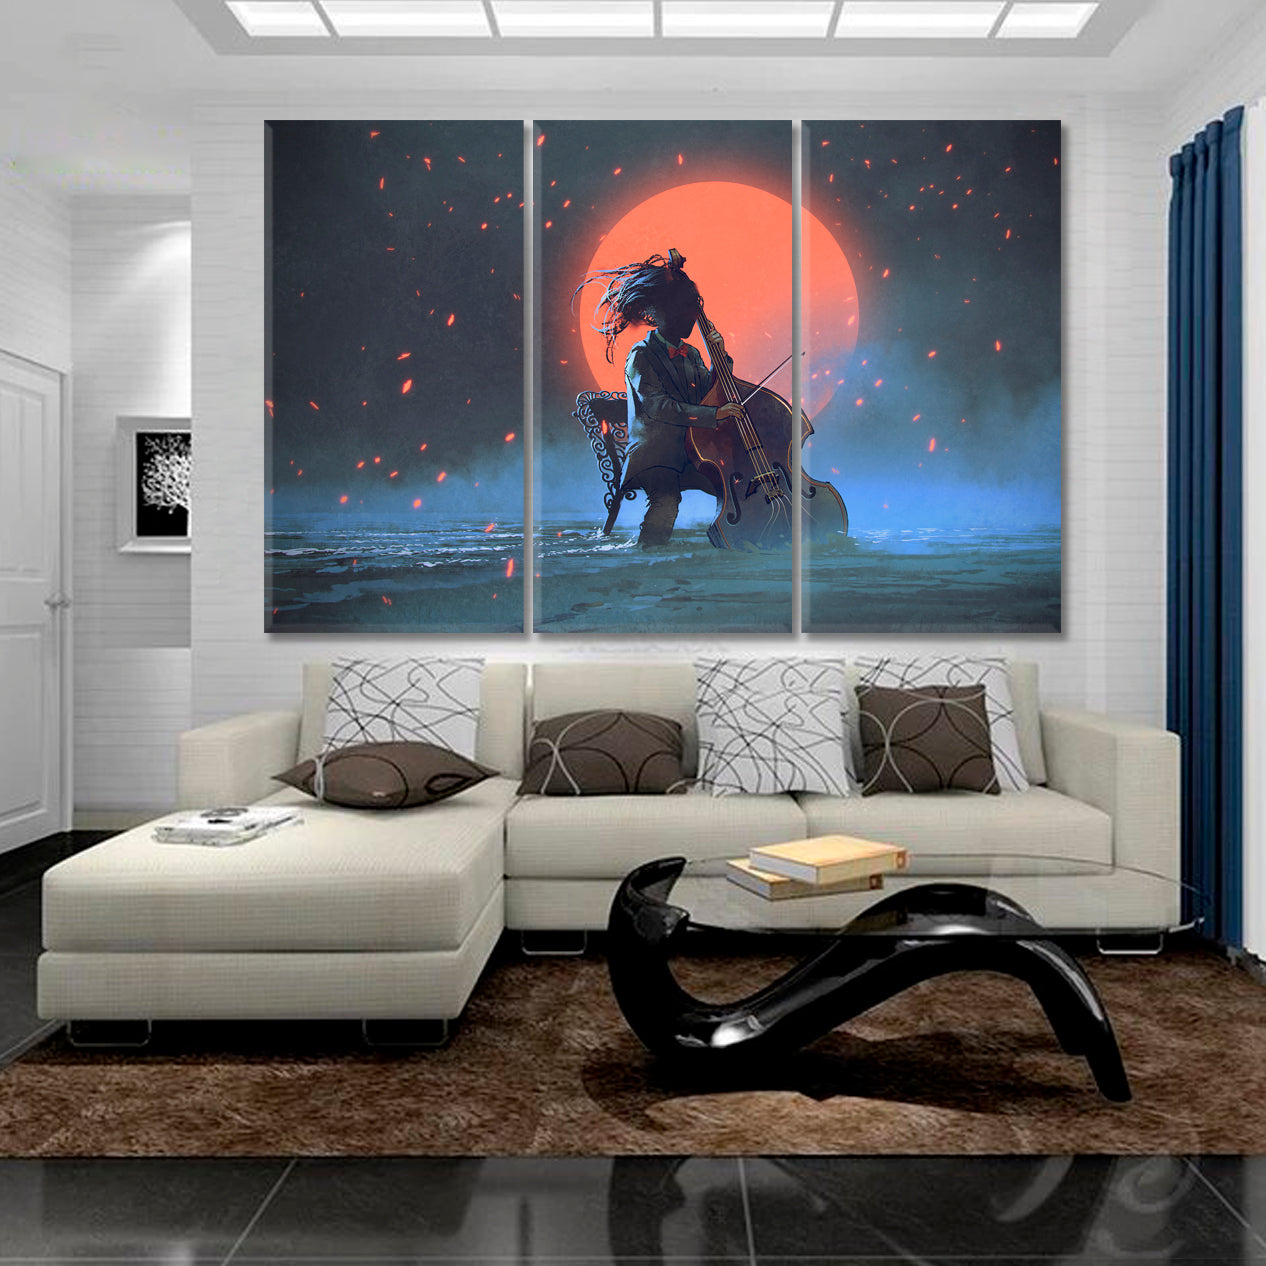 MOONLIGHT SONATA Inspired by Beethoven FANTASY Mysterious Man Surreal Fantasy Large Art Print Décor Artesty 3 panels 36" x 24" 